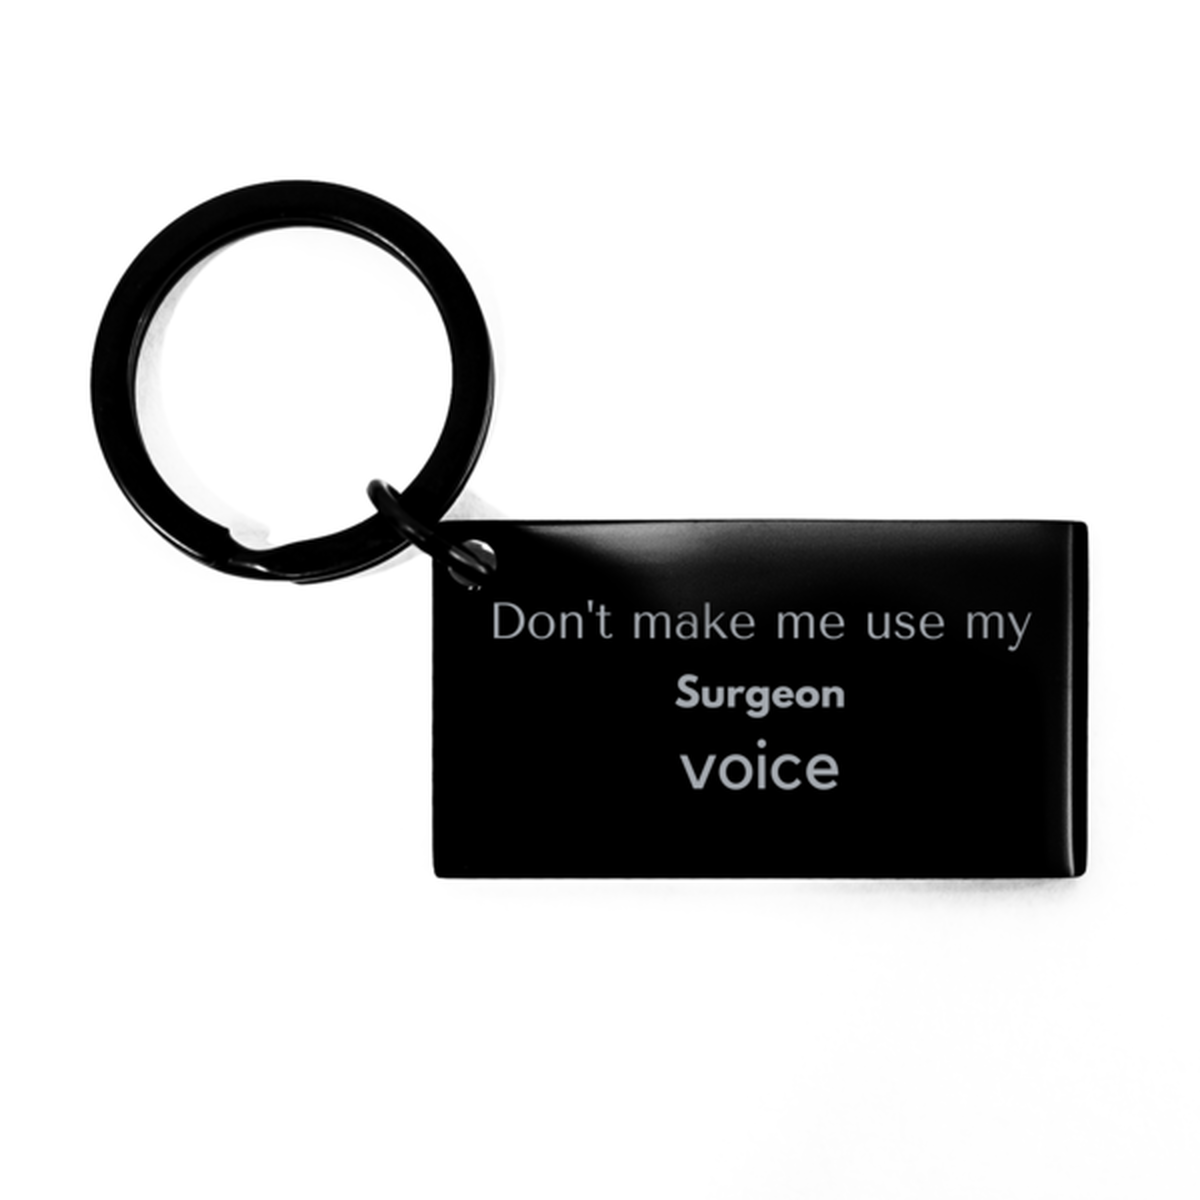 Don't make me use my Surgeon voice, Sarcasm Surgeon Gifts, Christmas Surgeon Keychain Birthday Unique Gifts For Surgeon Coworkers, Men, Women, Colleague, Friends